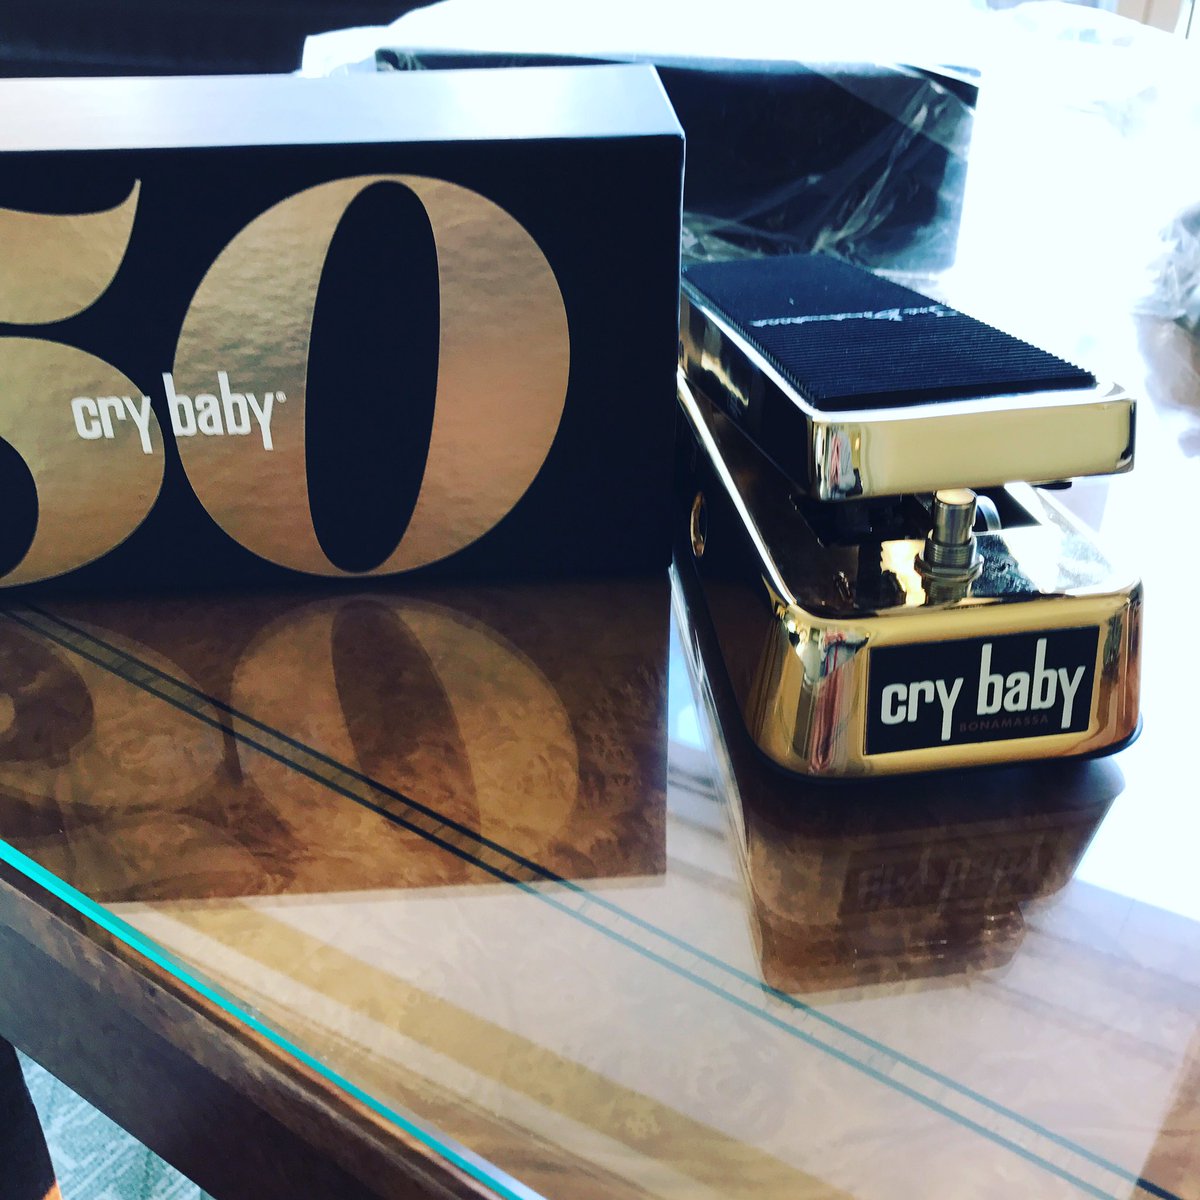 Also a million thanks to @jimdunlopusa for this all gold special 50th Anniversary Crybaby JB edition!!